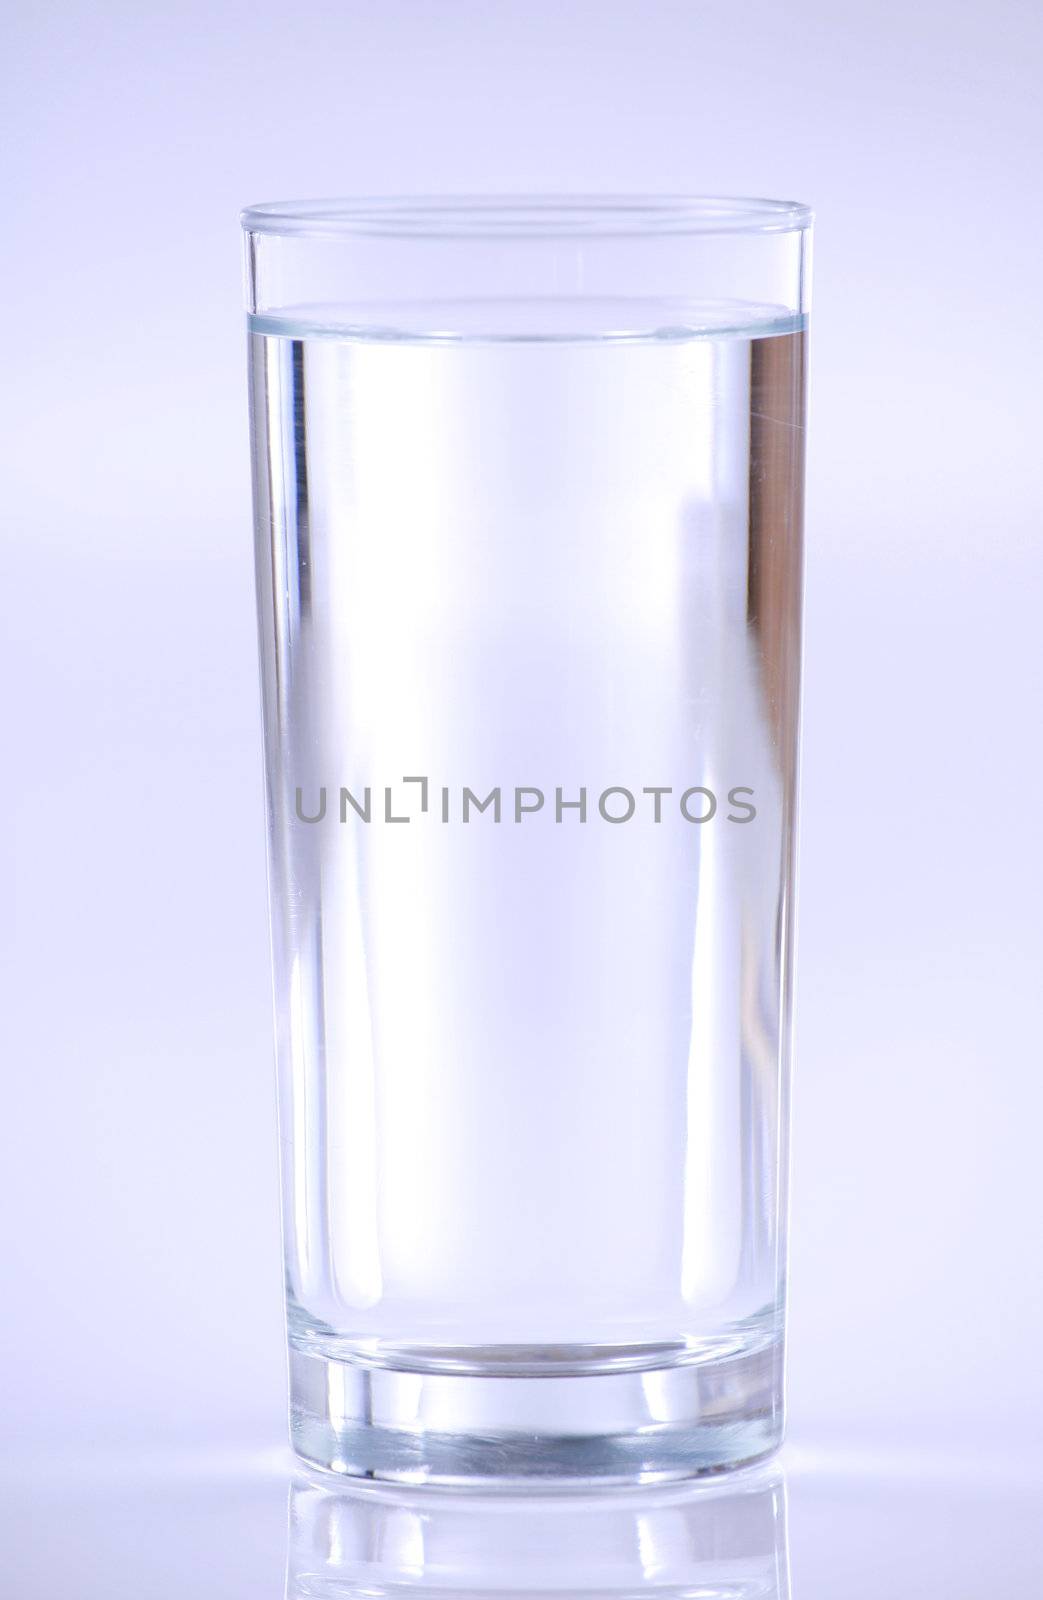 Clear glass of water, focus on sides shallow DOF